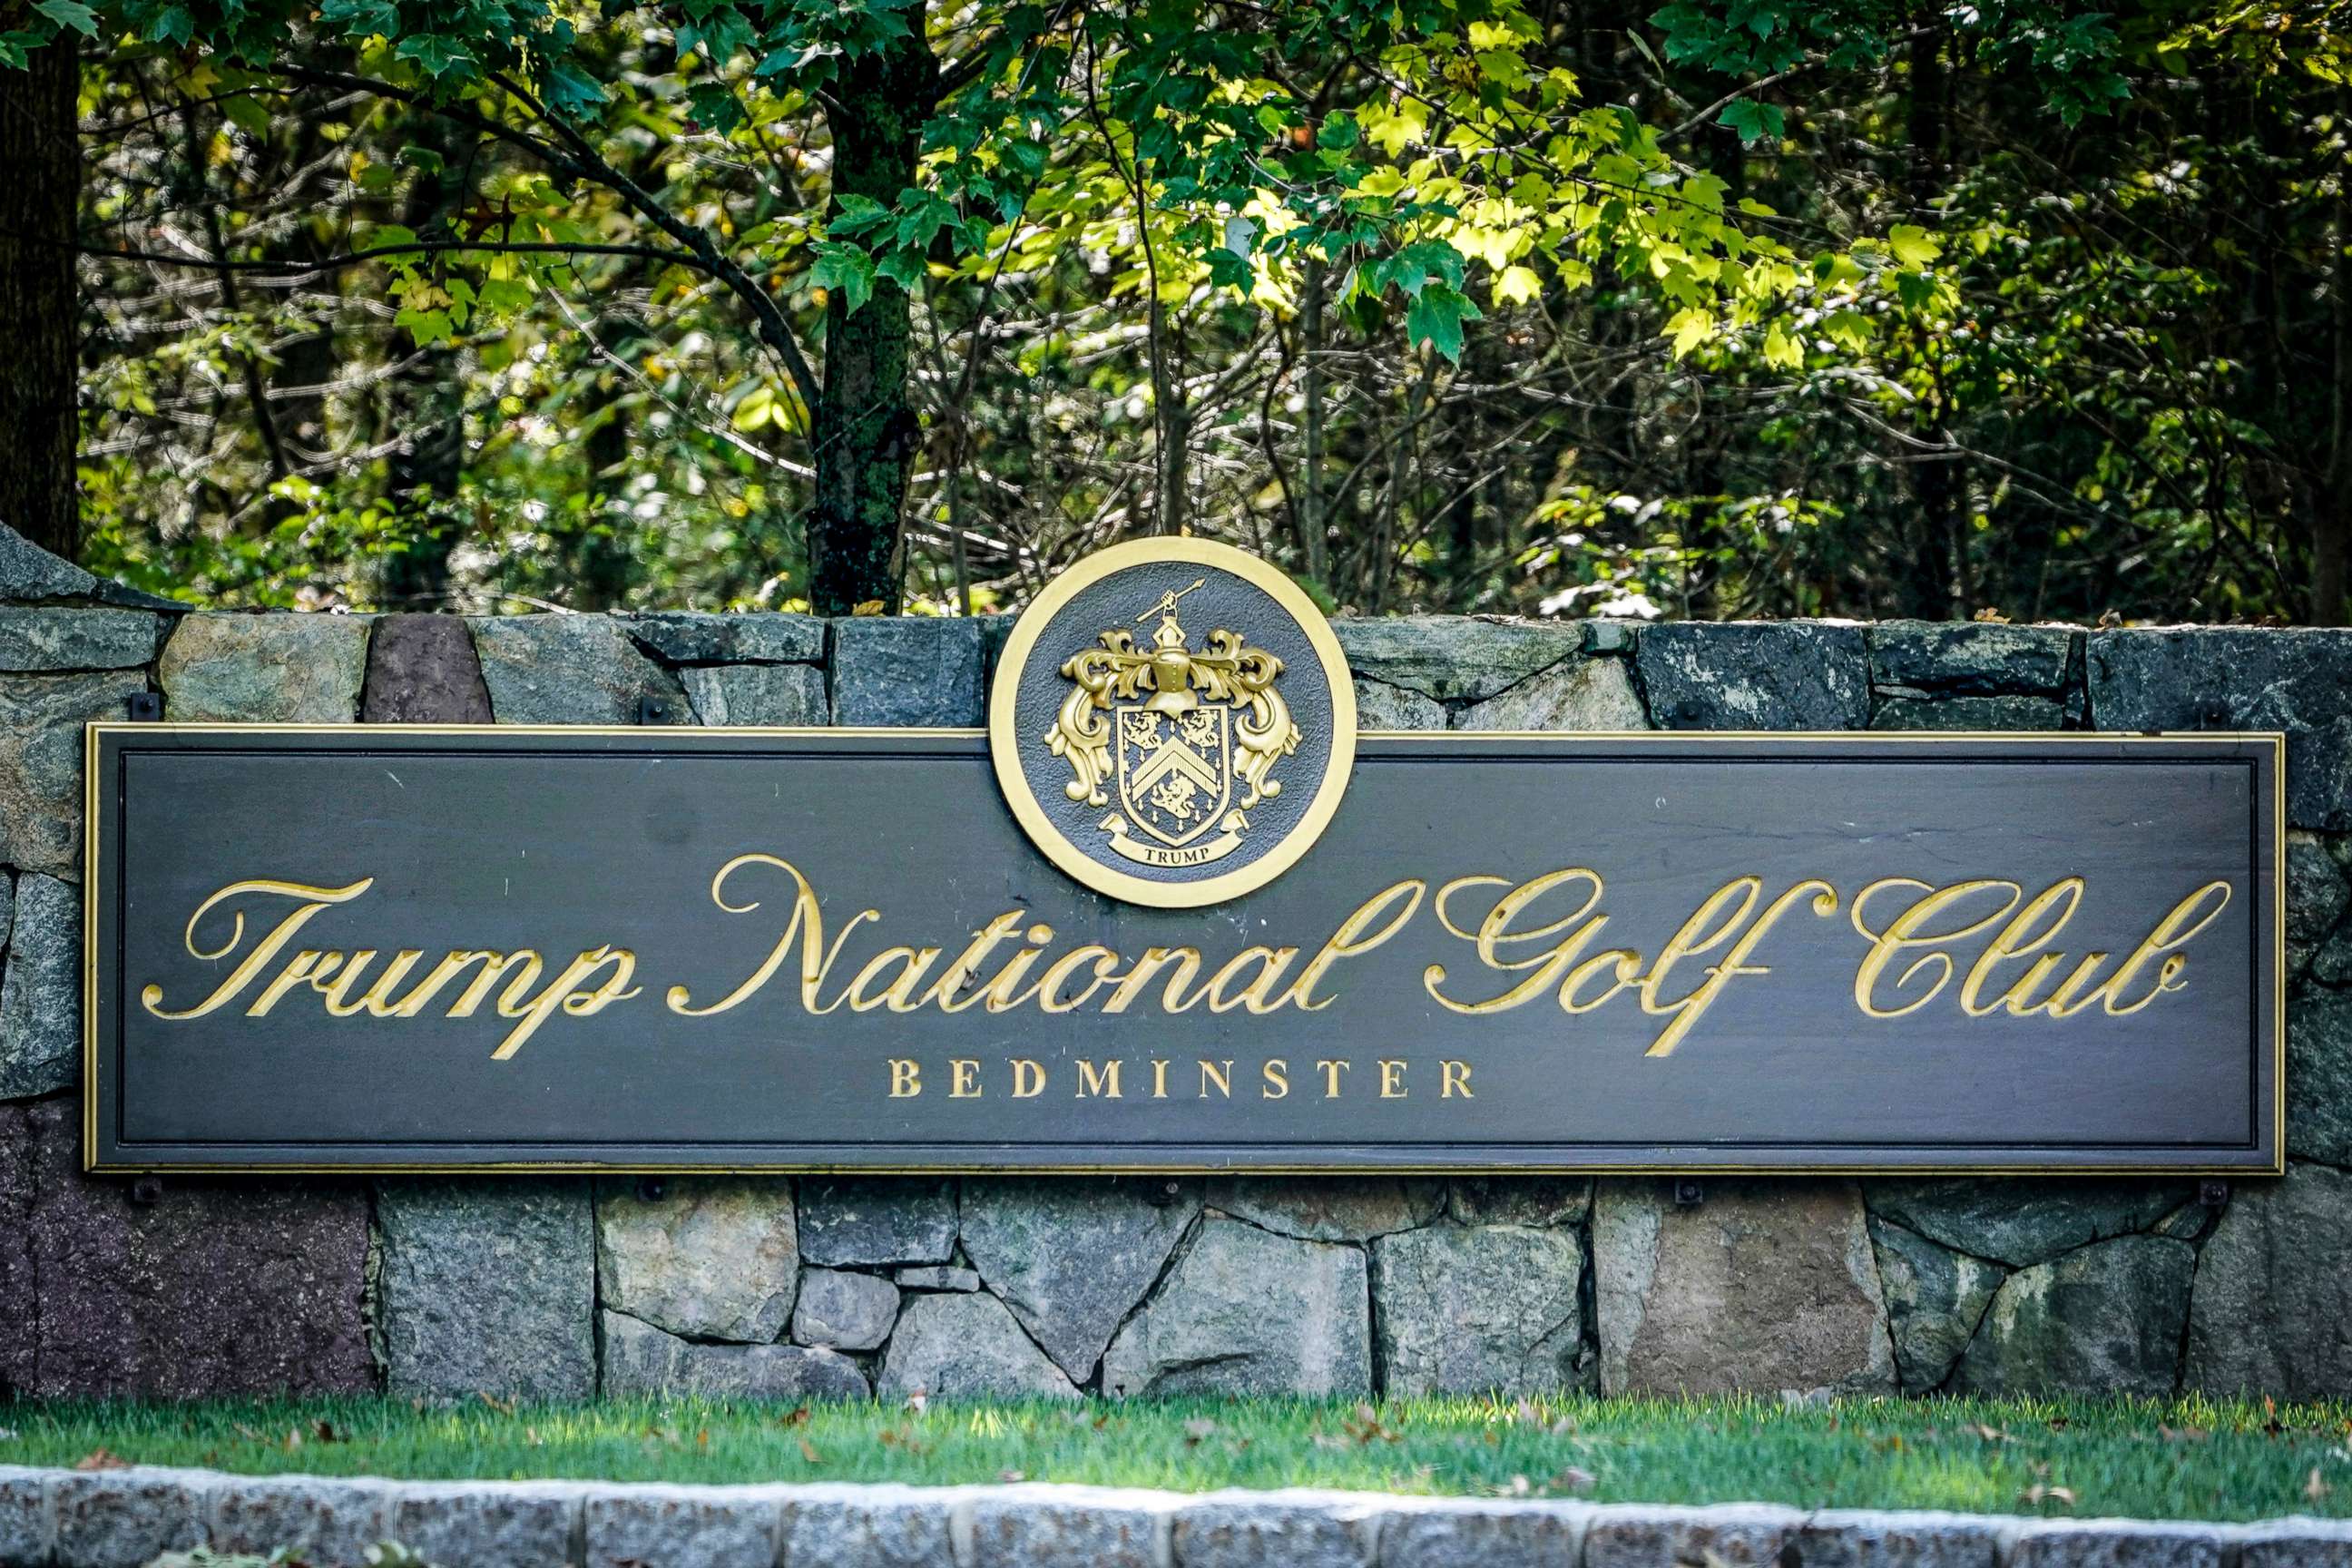 PHOTO: Signage for Trump National Golf Club is shown on approach to the entrance in Bedminster, N.J., on Oct. 2, 2020.